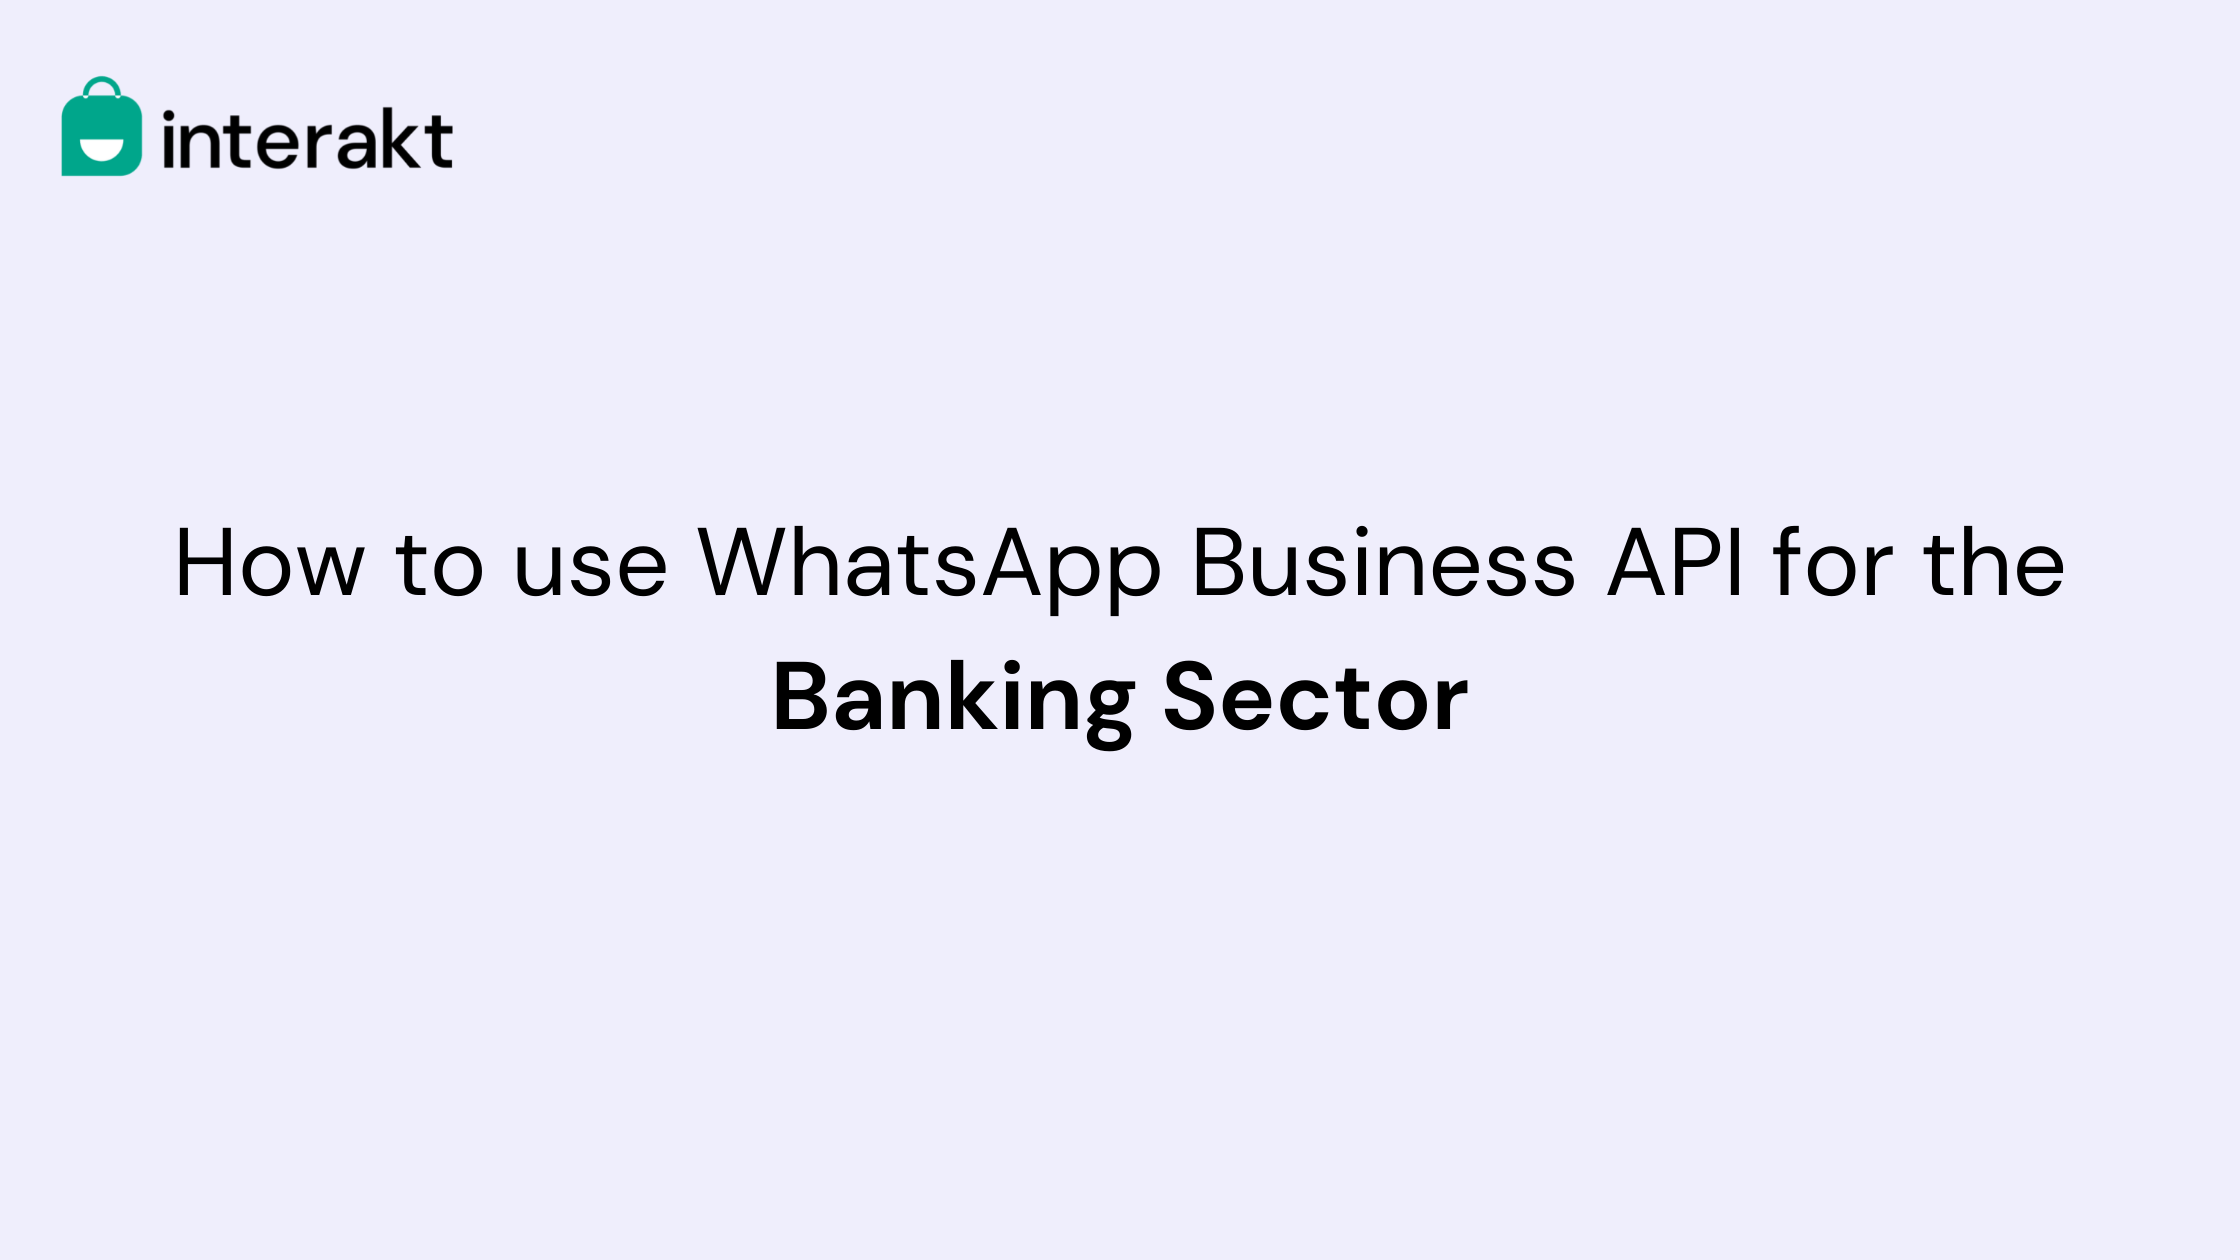 How to use WhatsApp Business API for the Banking Sector